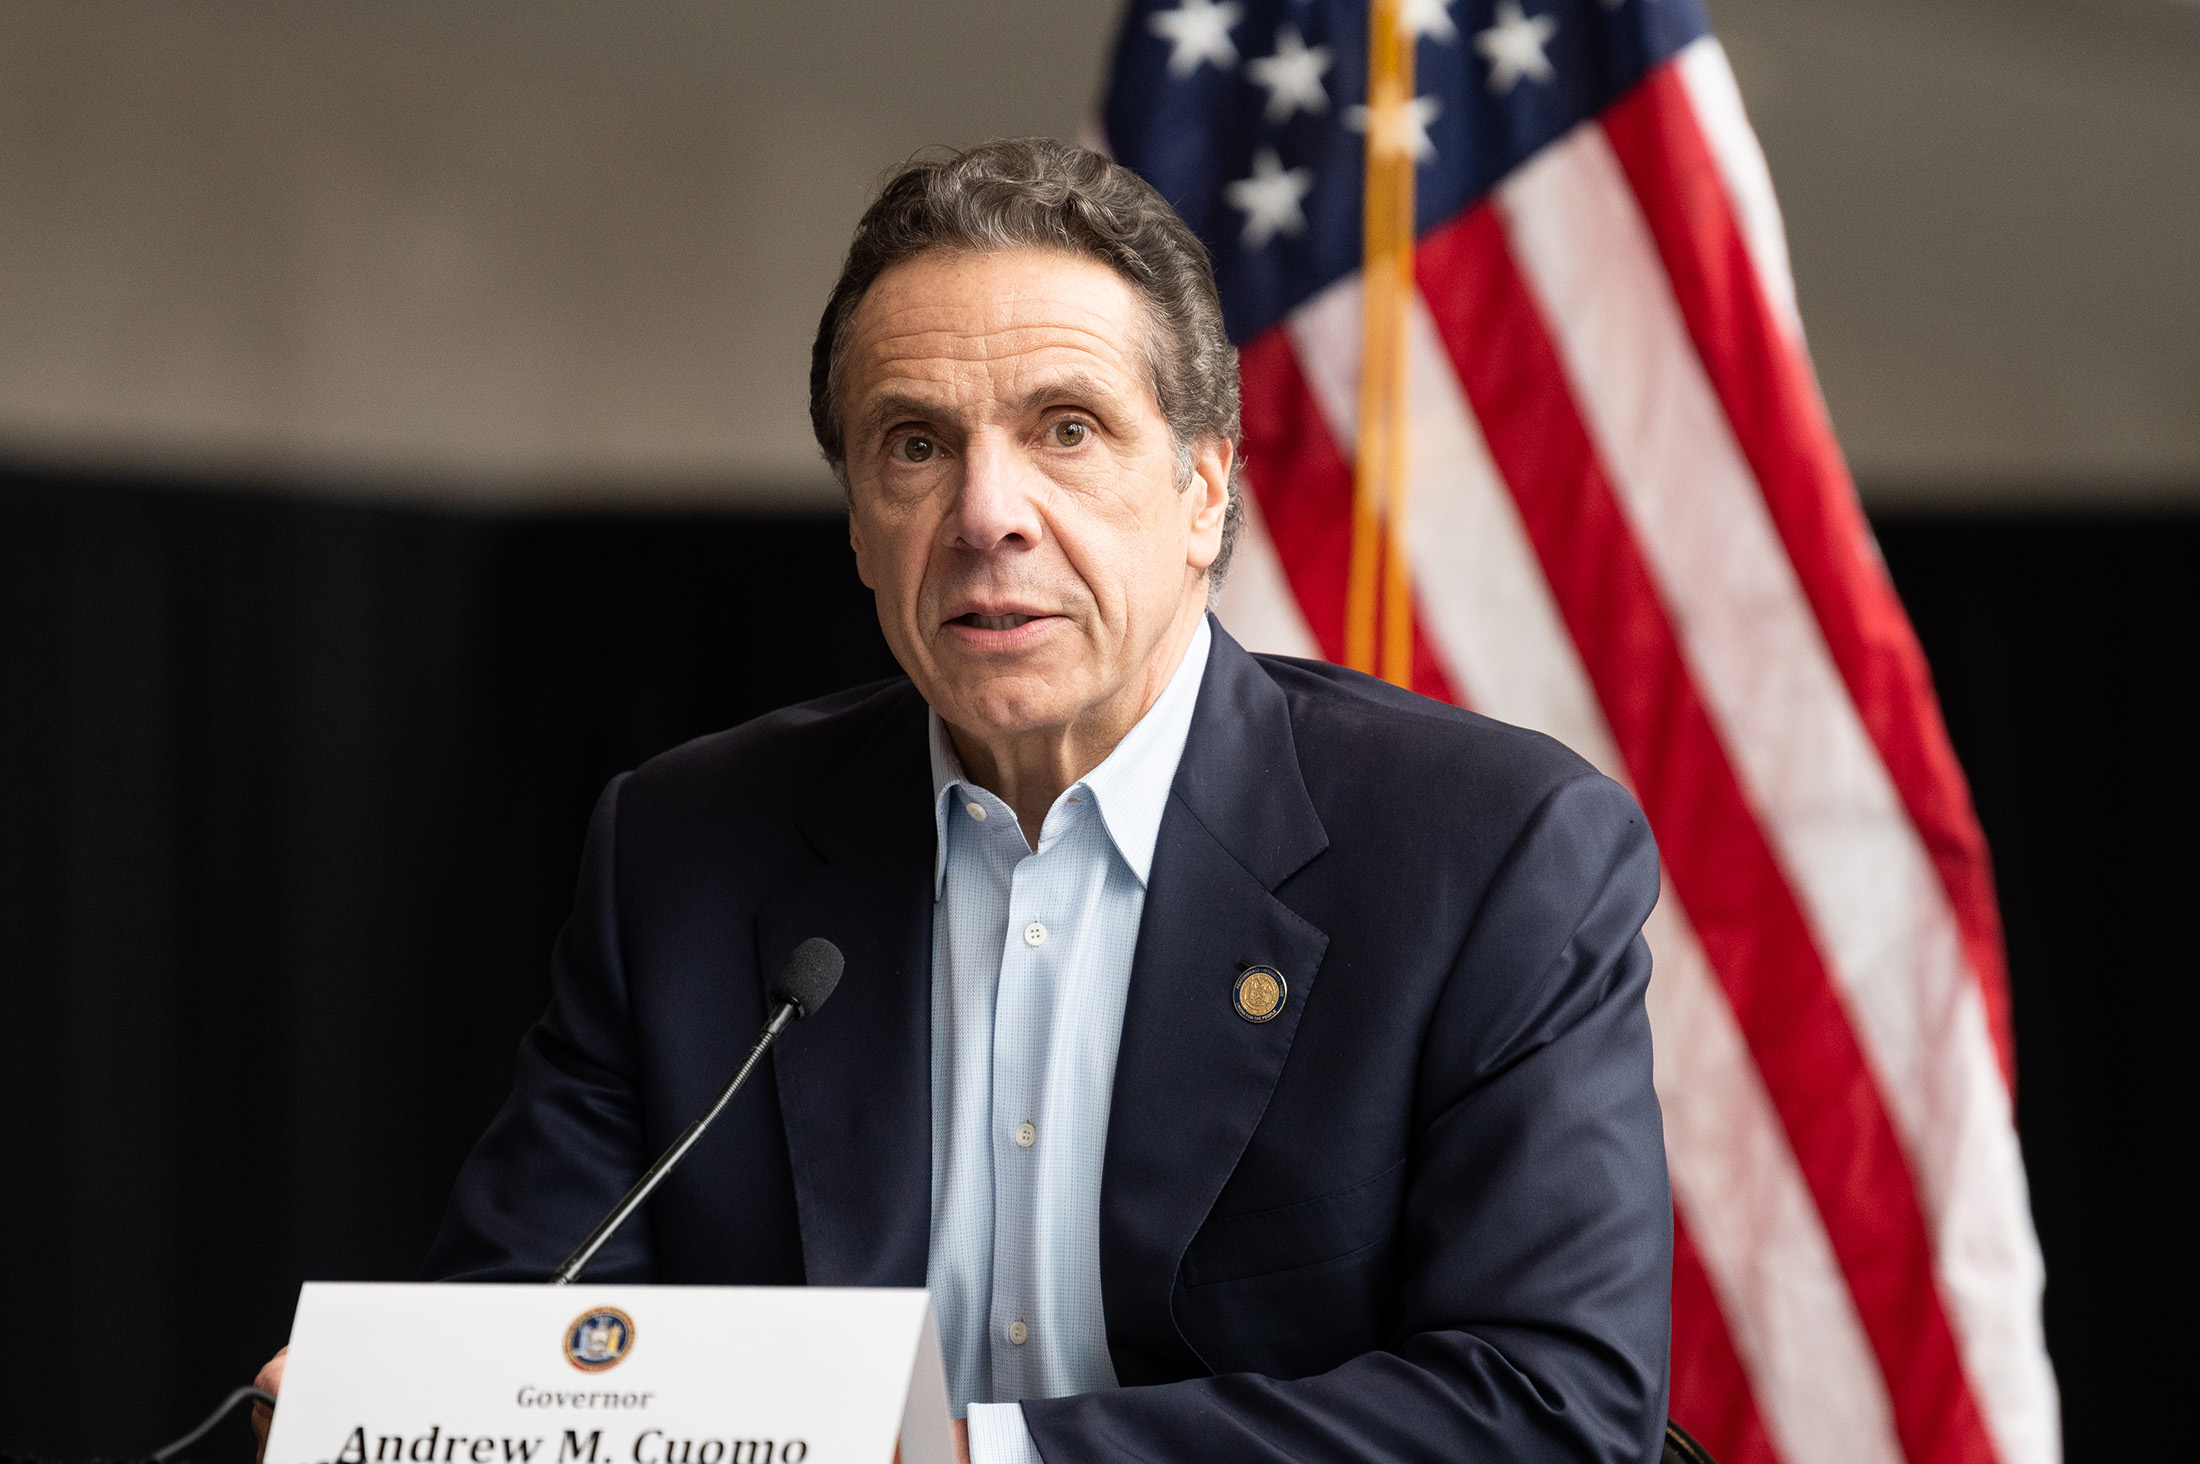 Governor Andrew Cuomo Press Conference in New York, US